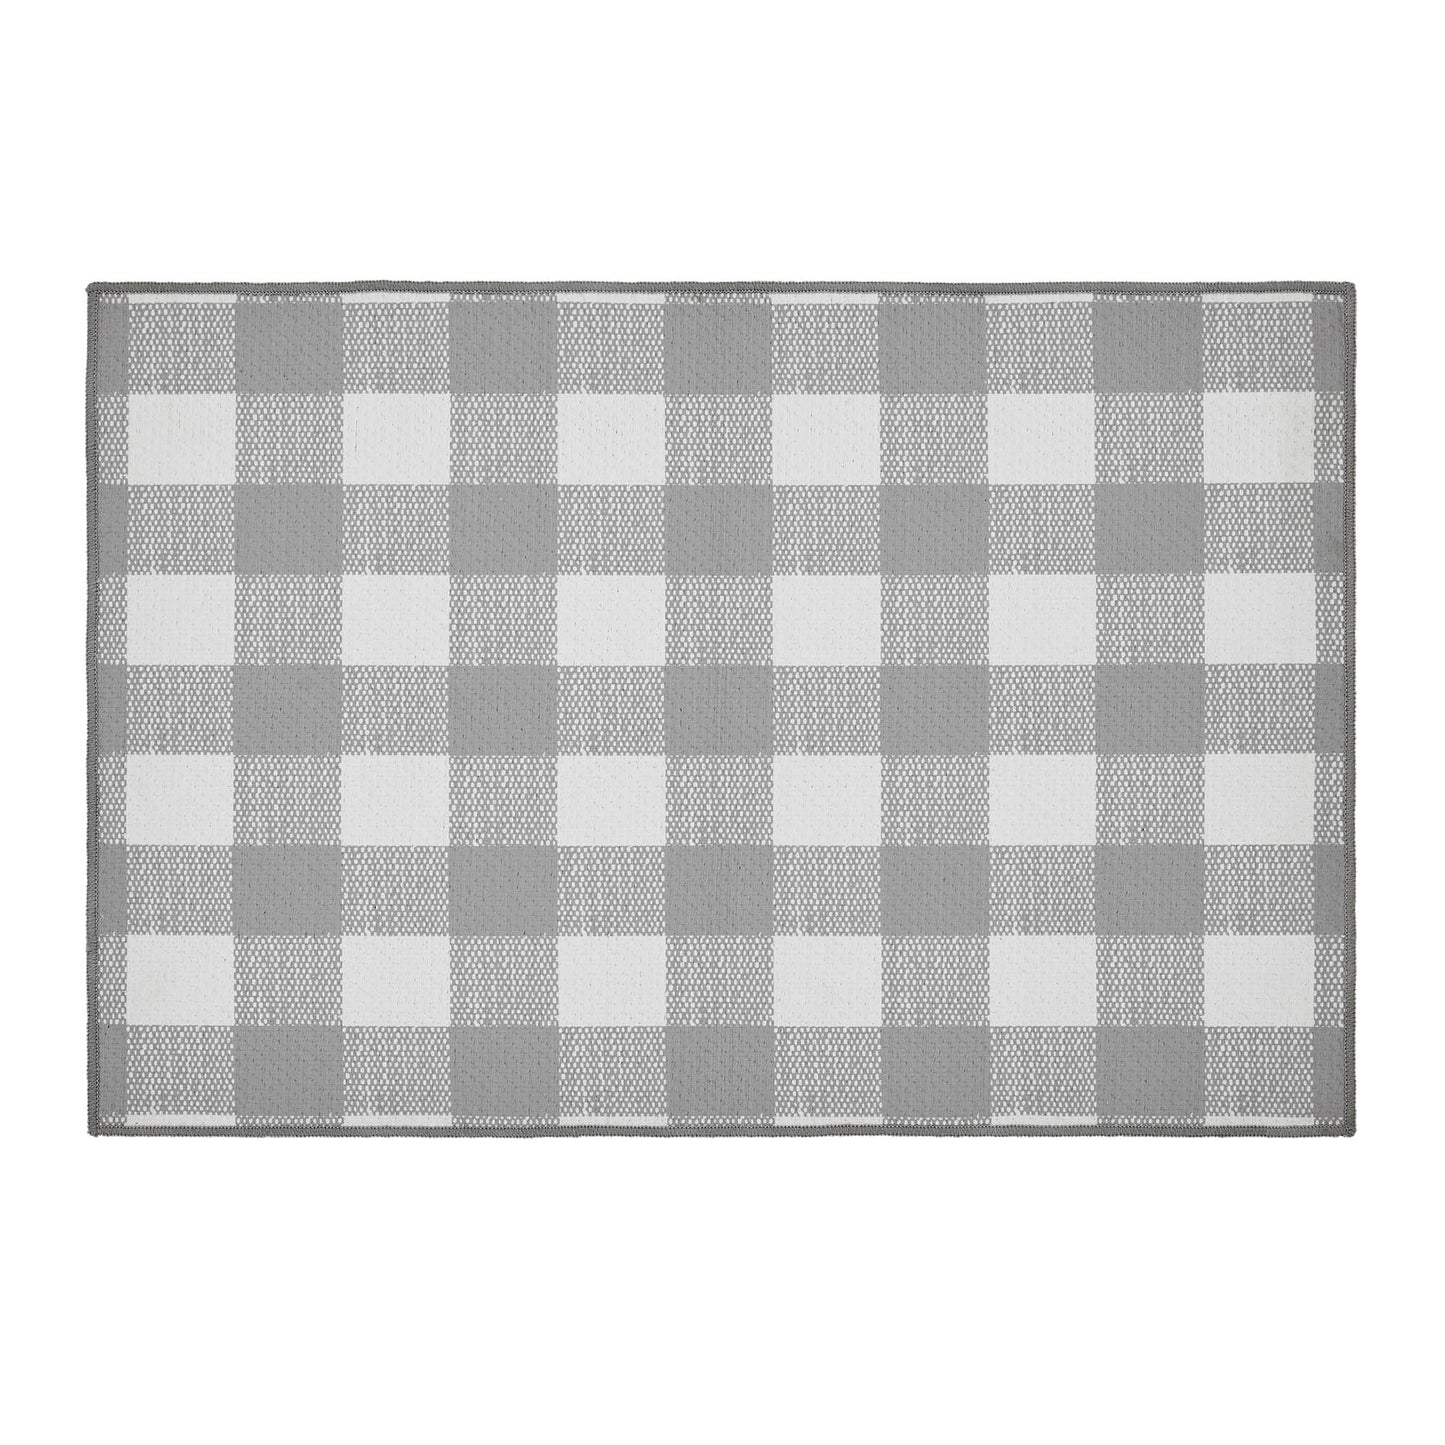 VHC Brands Annie Buffalo Check Grey Indoor/Outdoor Rug Rect 24x36, Polyester Area Rug, Accent Rug, Floor Decor, Annie Buffalo Check Collection, Rectangle 24x36, Ash Grey